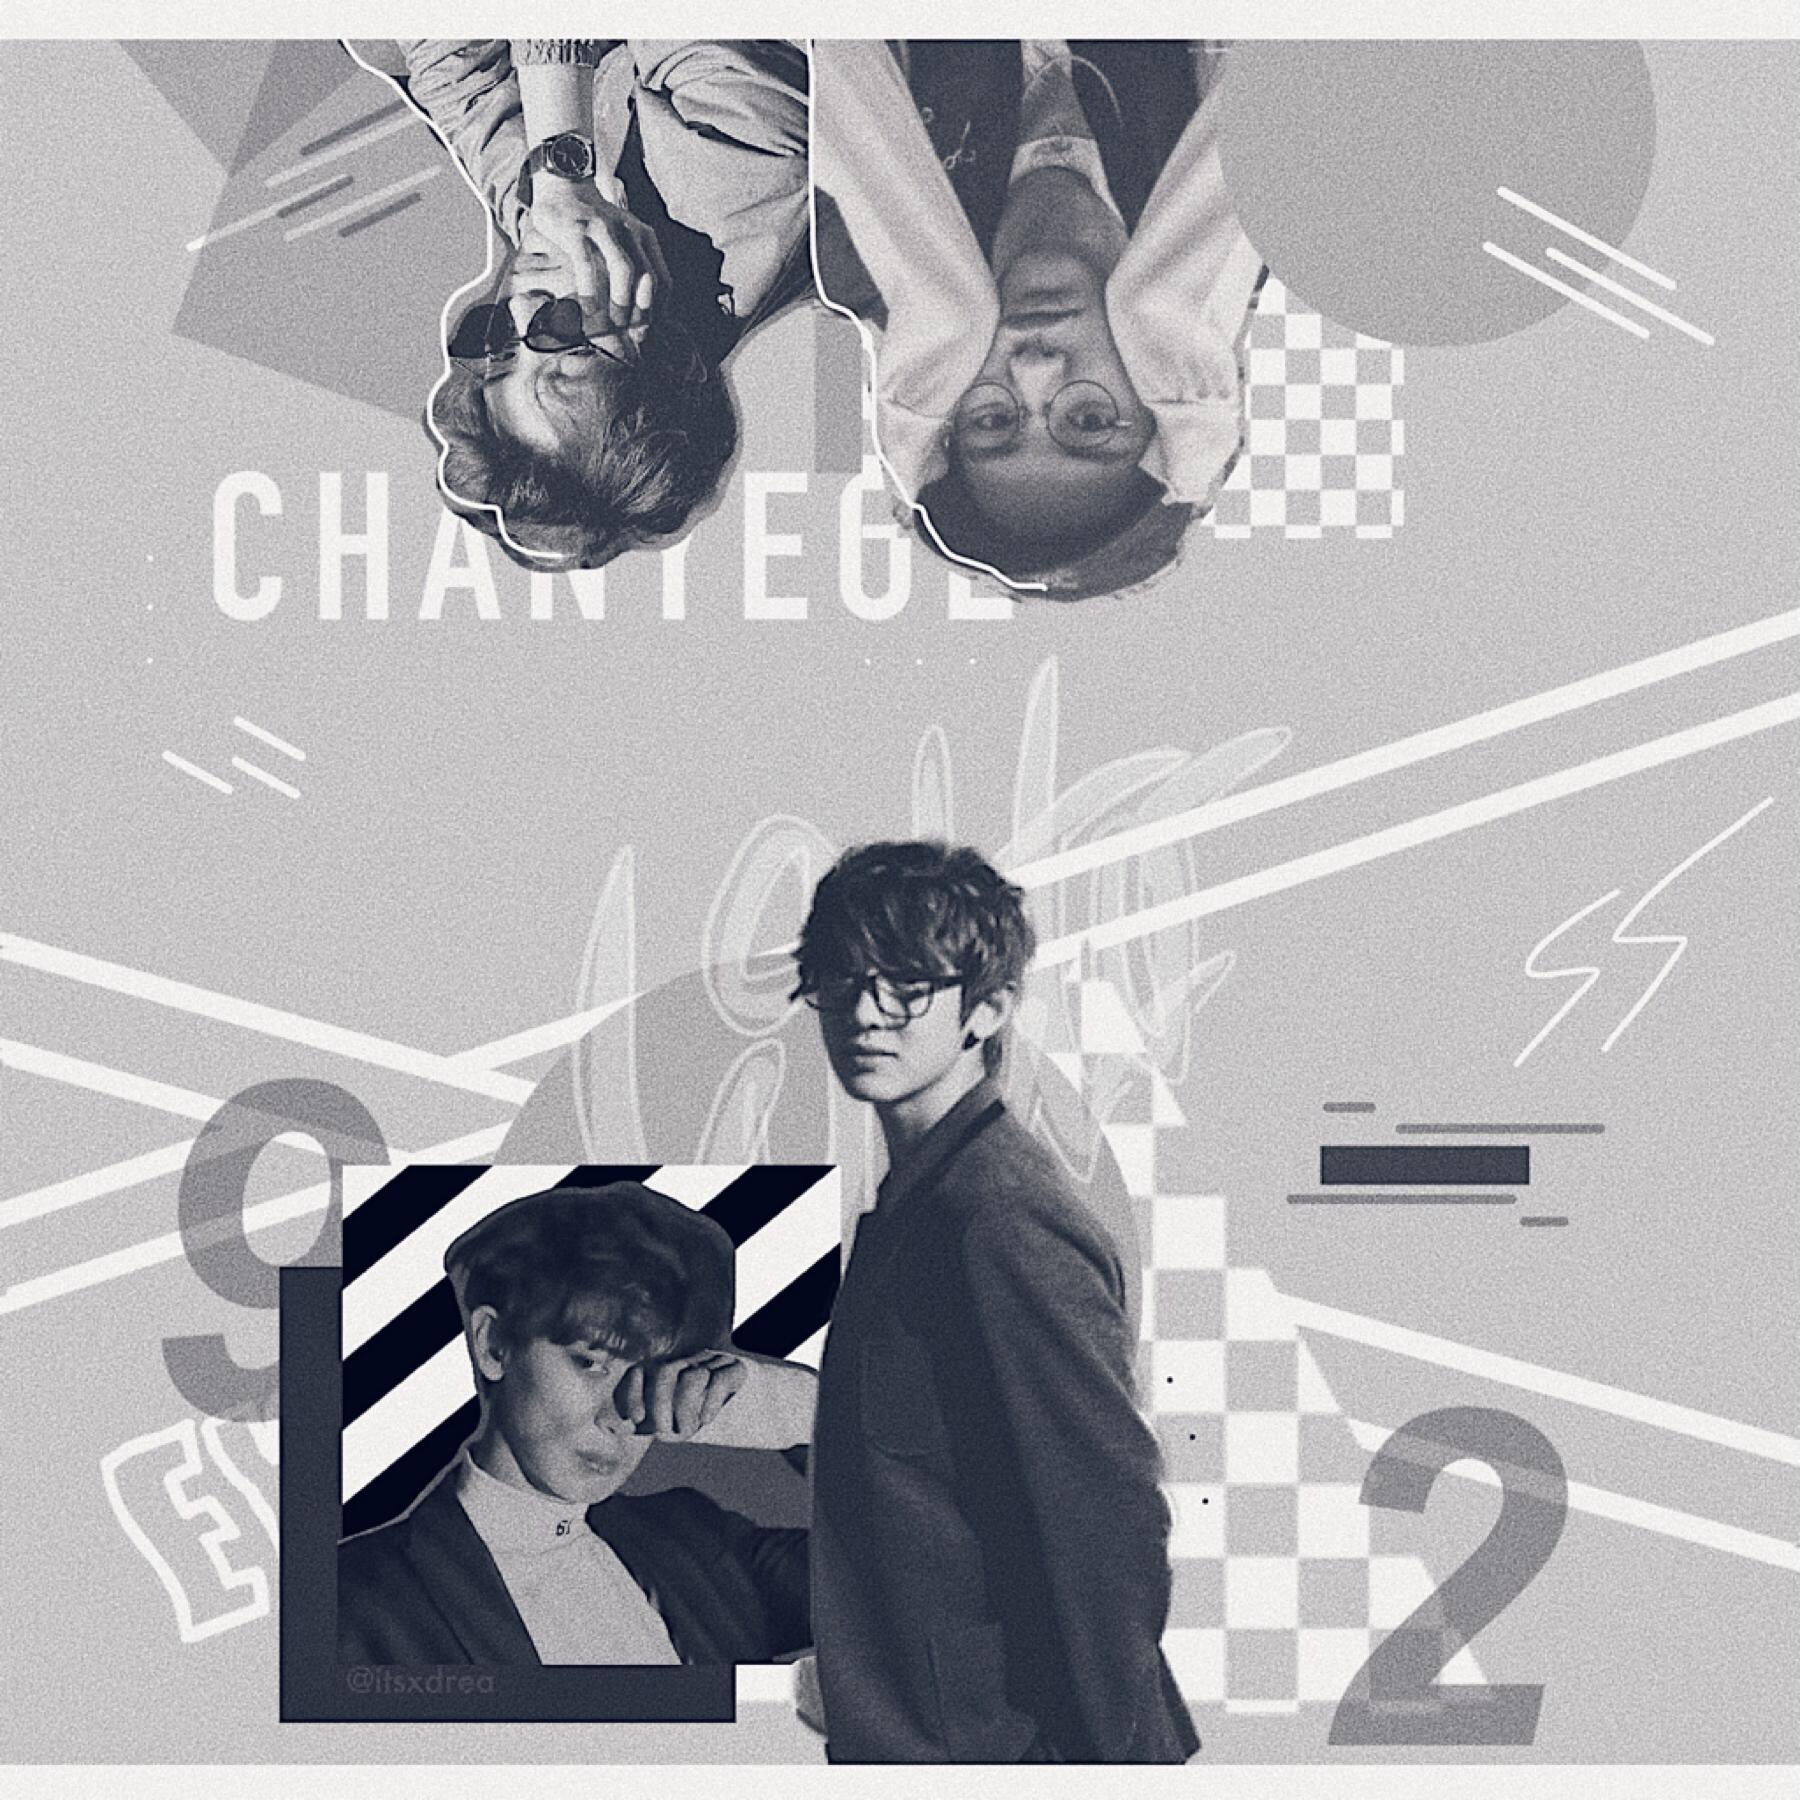 ☁️
chanyeol // exo
| inspired by whi | 
i’m “back” for editing. BUT YALL AP TESTING IS OVER (FOR ME) AND I CAN HAVE MY LIFE BACK NOW. BUT IM SO SAD BC I GOT SUCH A WACK PROMPT😩 I HOPE THE COLLEGE BOARD IS NICE TO ME N GIVES ME A 3